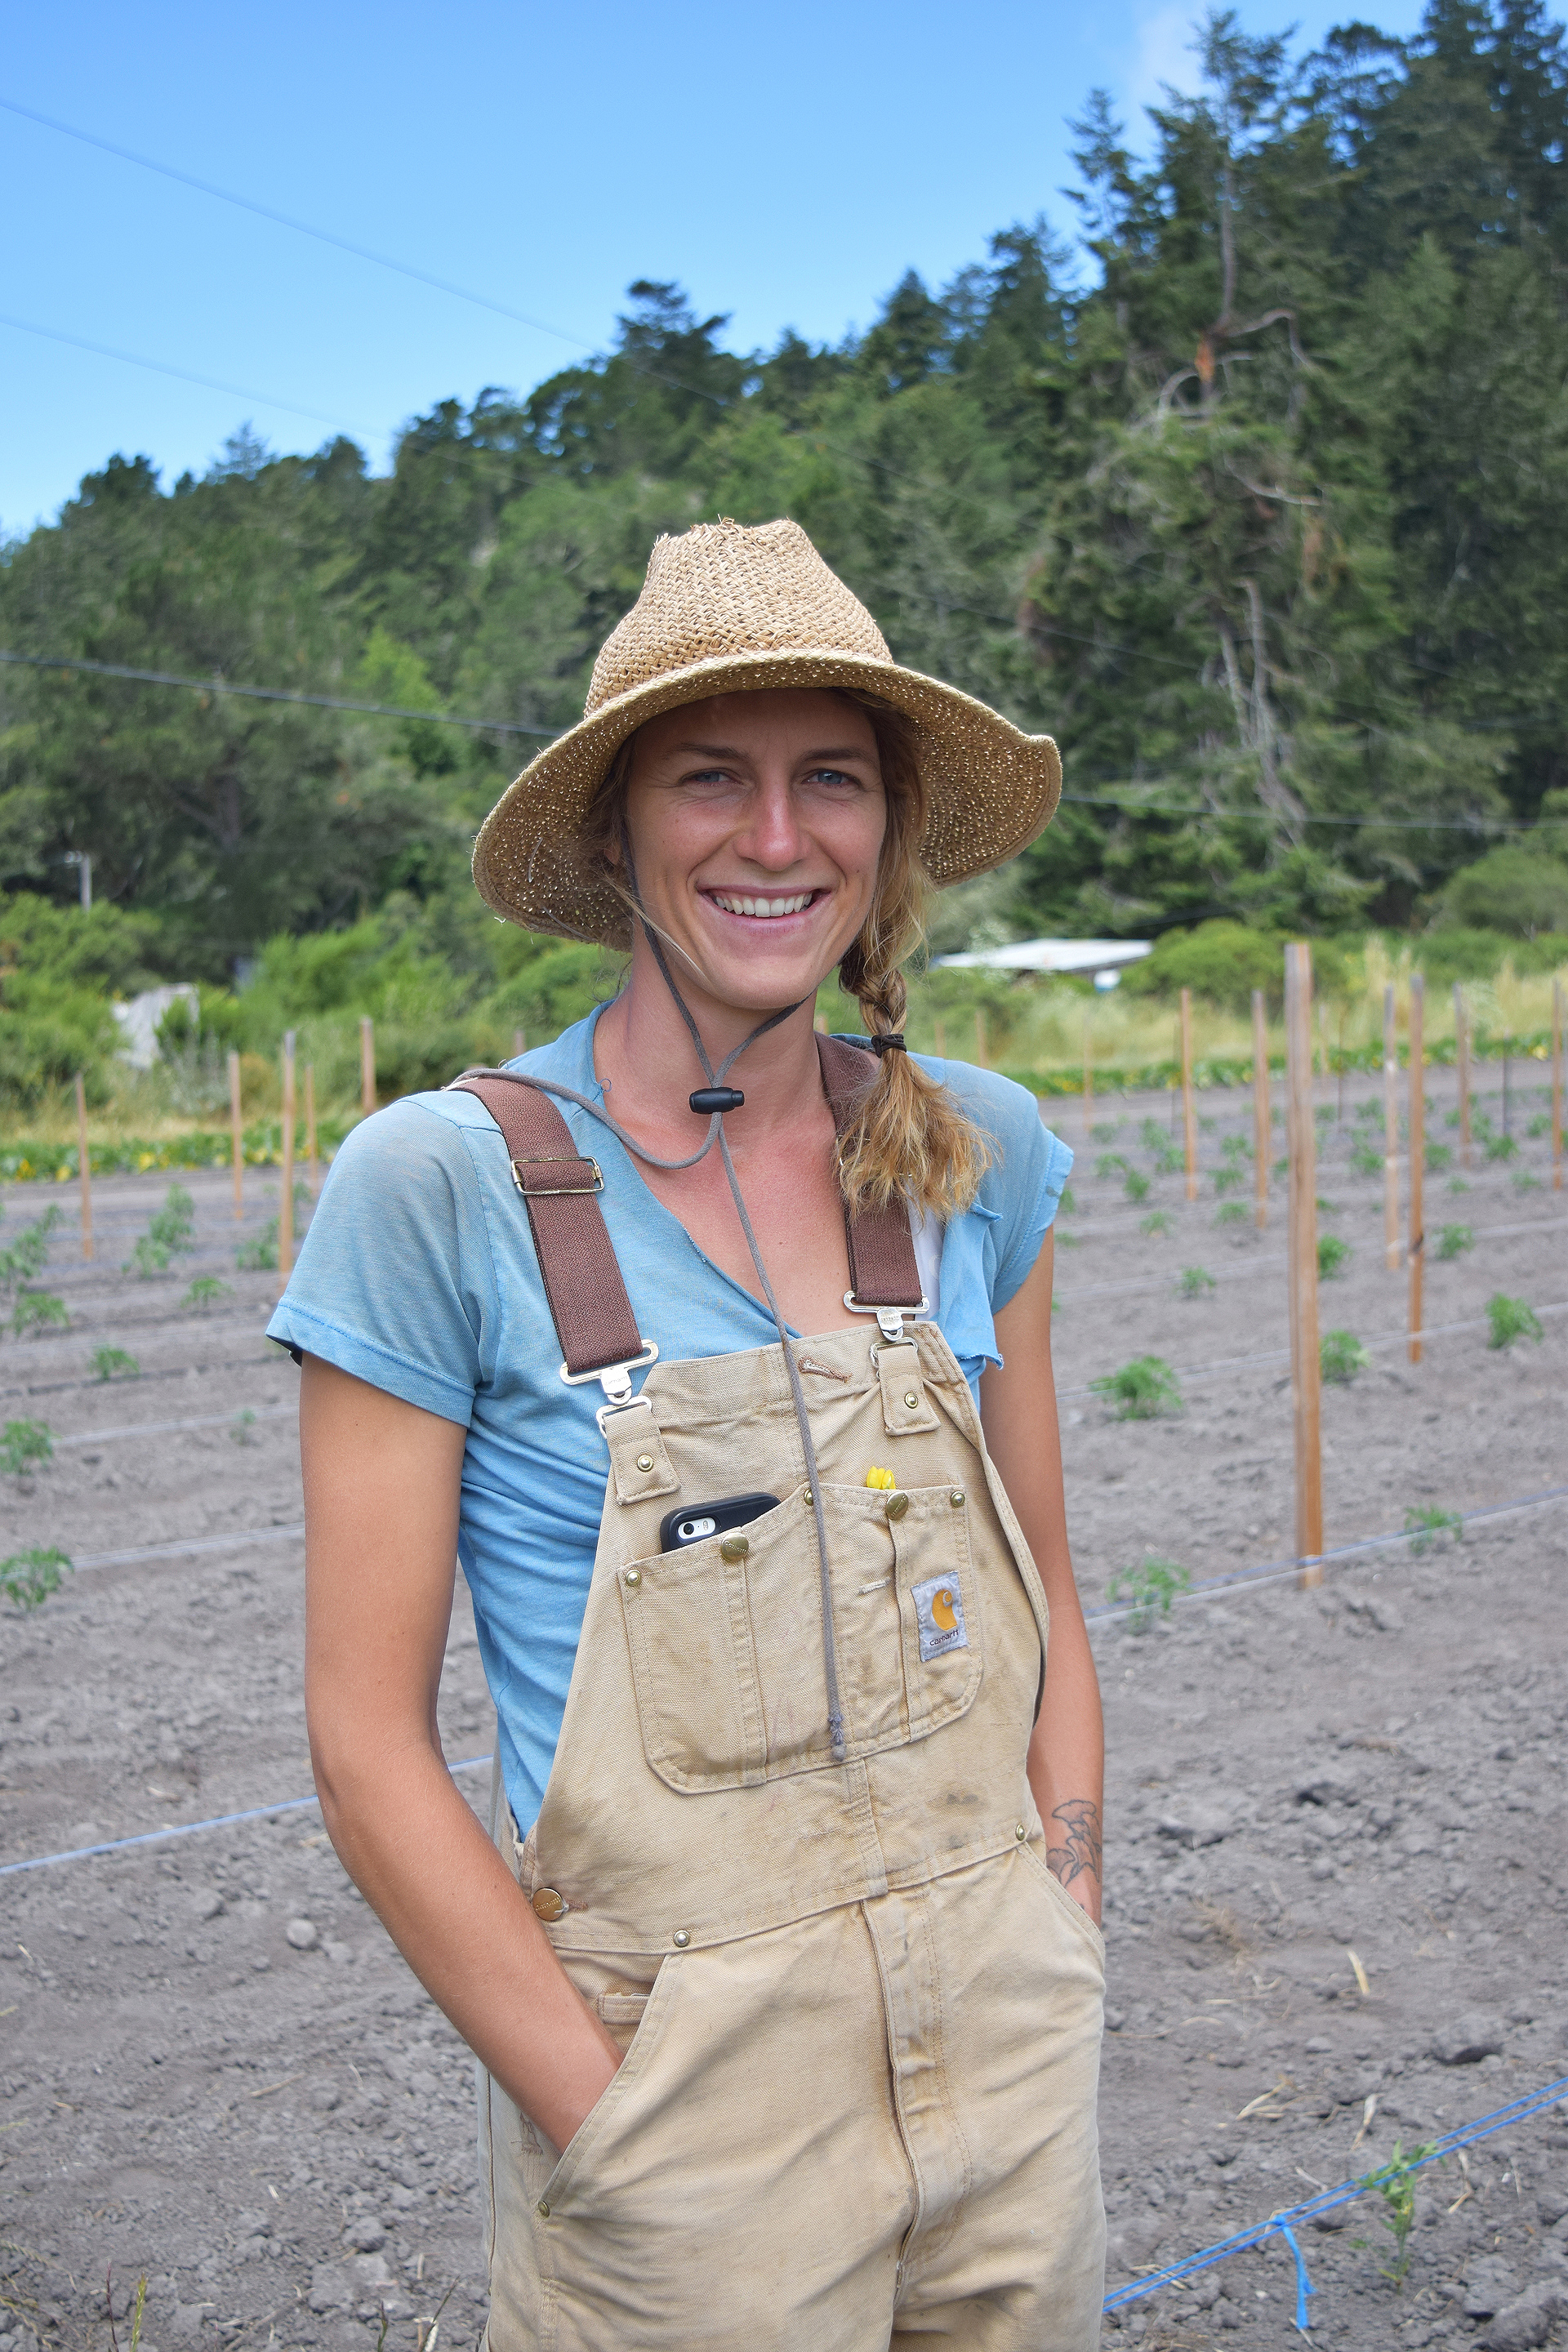 Gia Matzinger and her two farming partners grow Seascape and Albion strawberries at Green Oaks Creek in Pescadero.